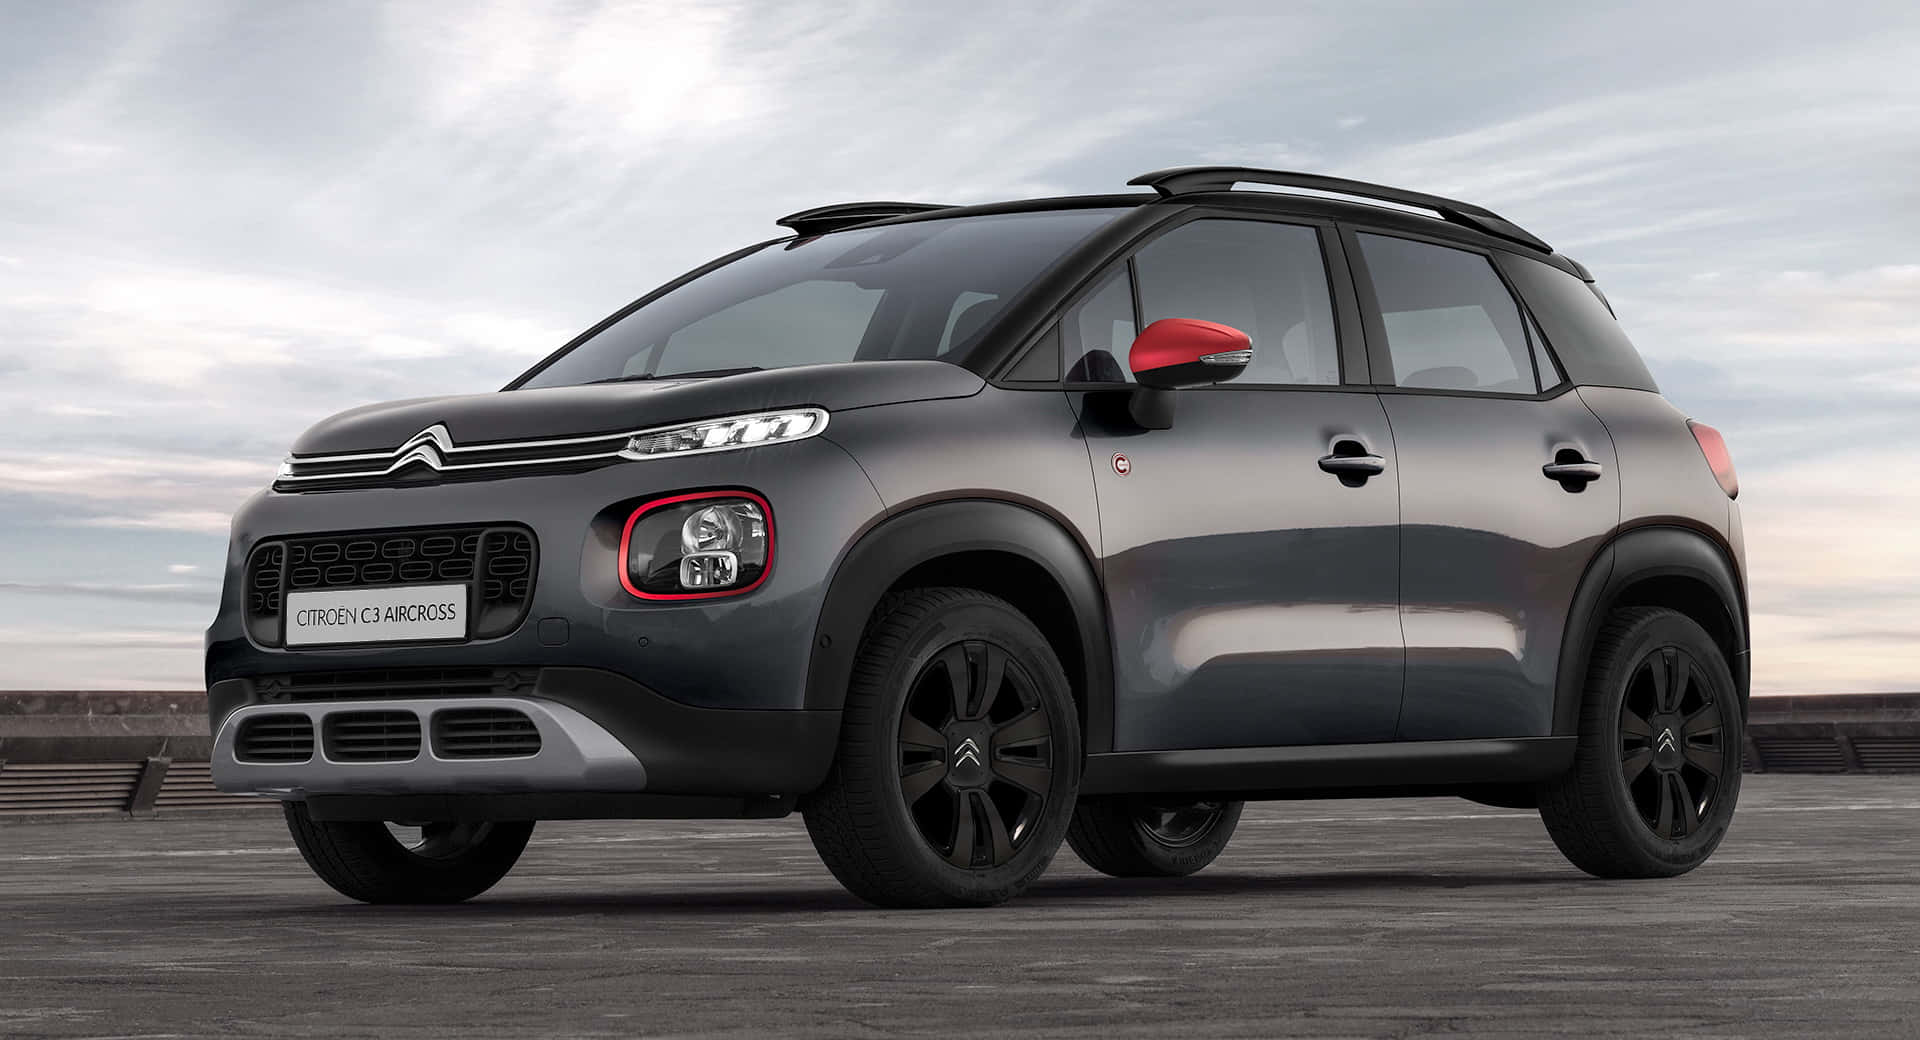 Citroen - Style, Comfort and Reliability